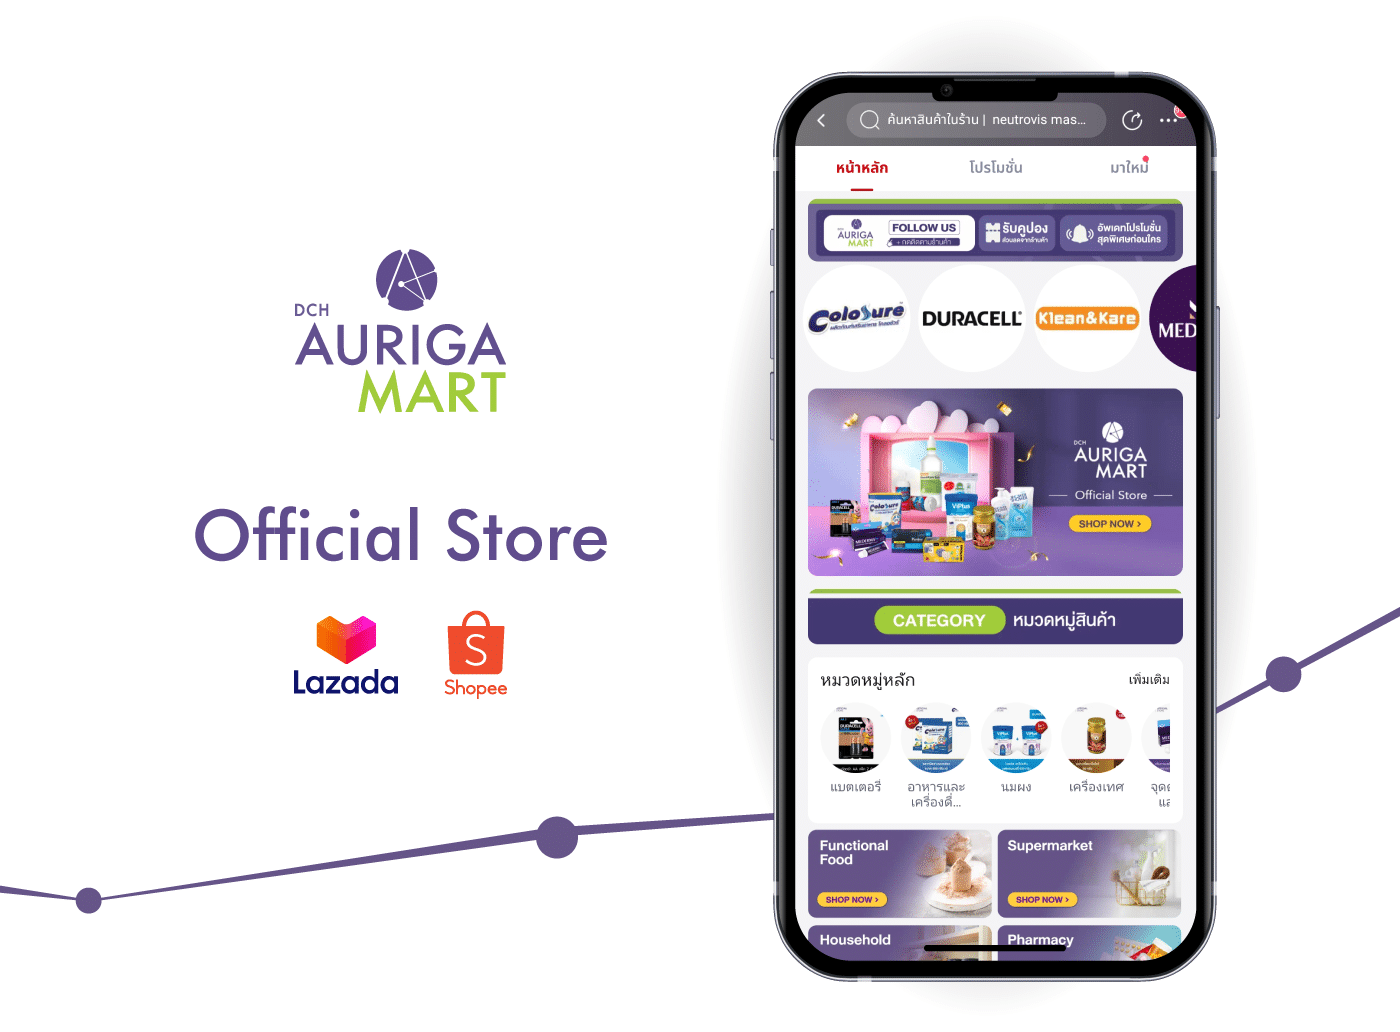 DCH AurigaMart Lazada and Shopee